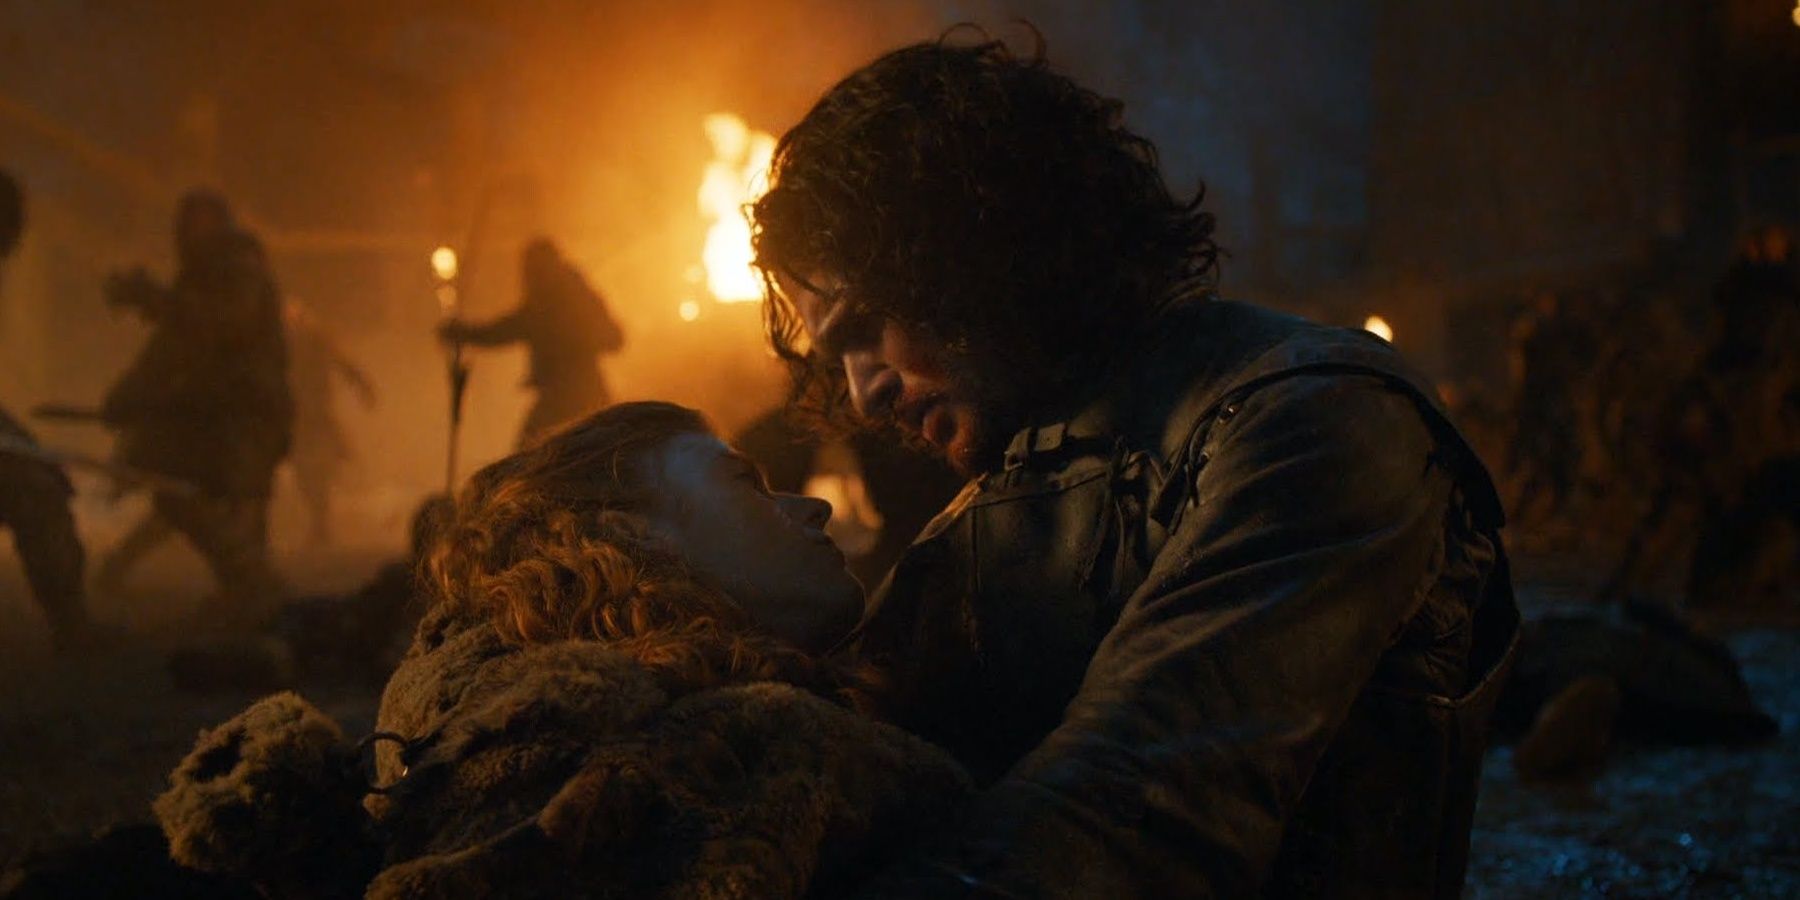 Ygritte dies in Jon Snow's arms in Game of Thrones.